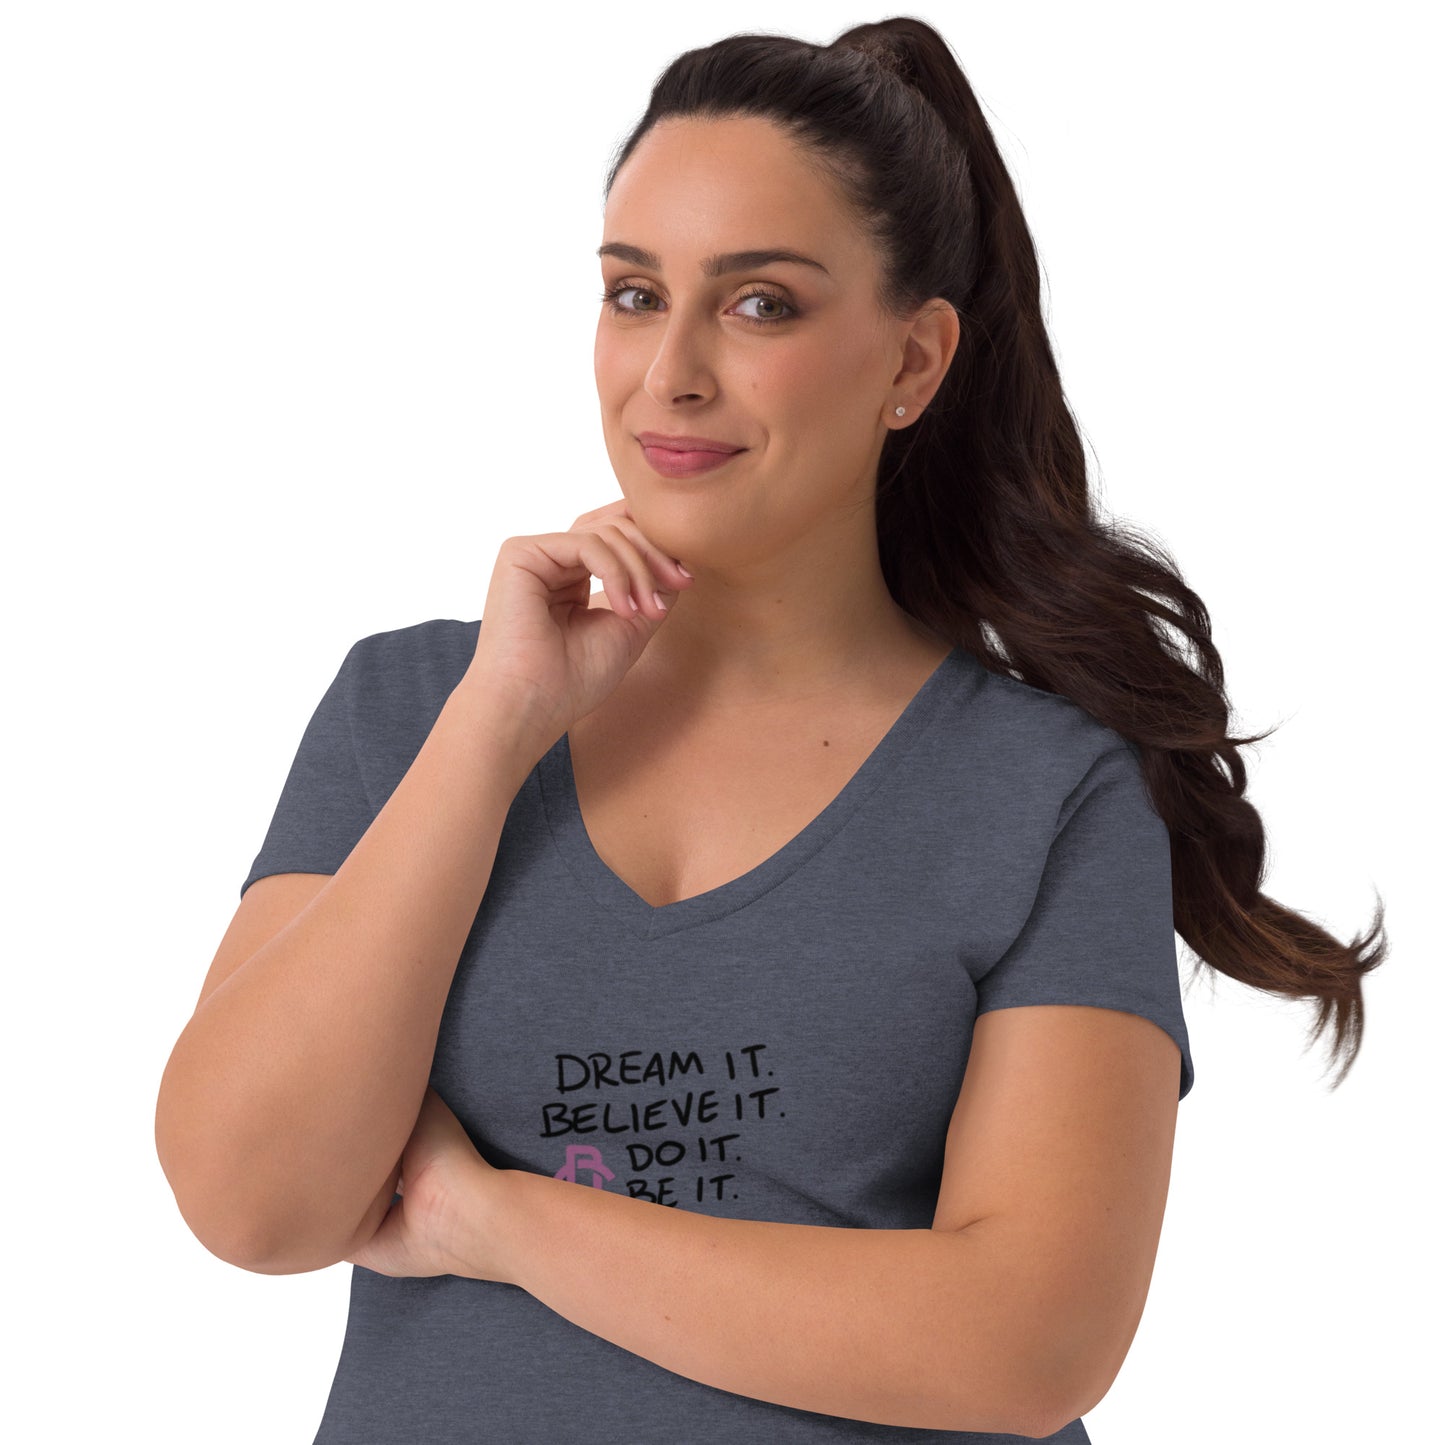 Romi Chase Quote Women’s Recycled V-neck T-shirt